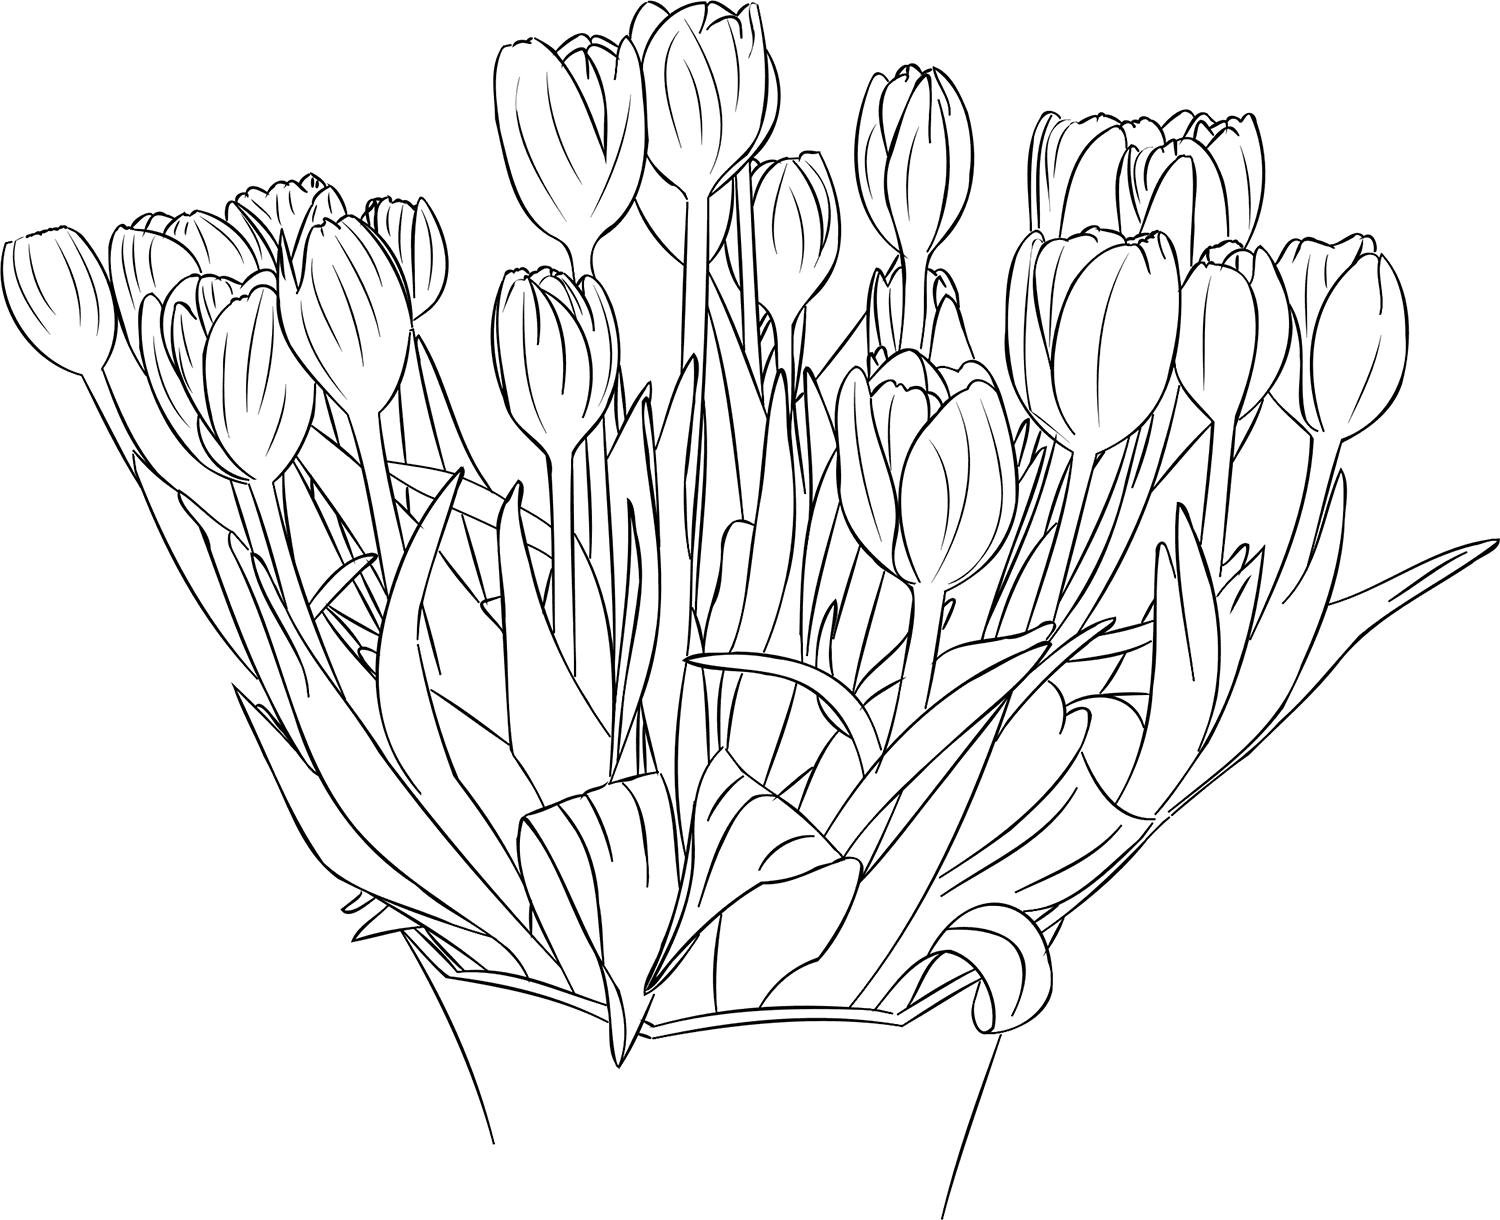 Coloring page Tulips The largest bouquet of tulips